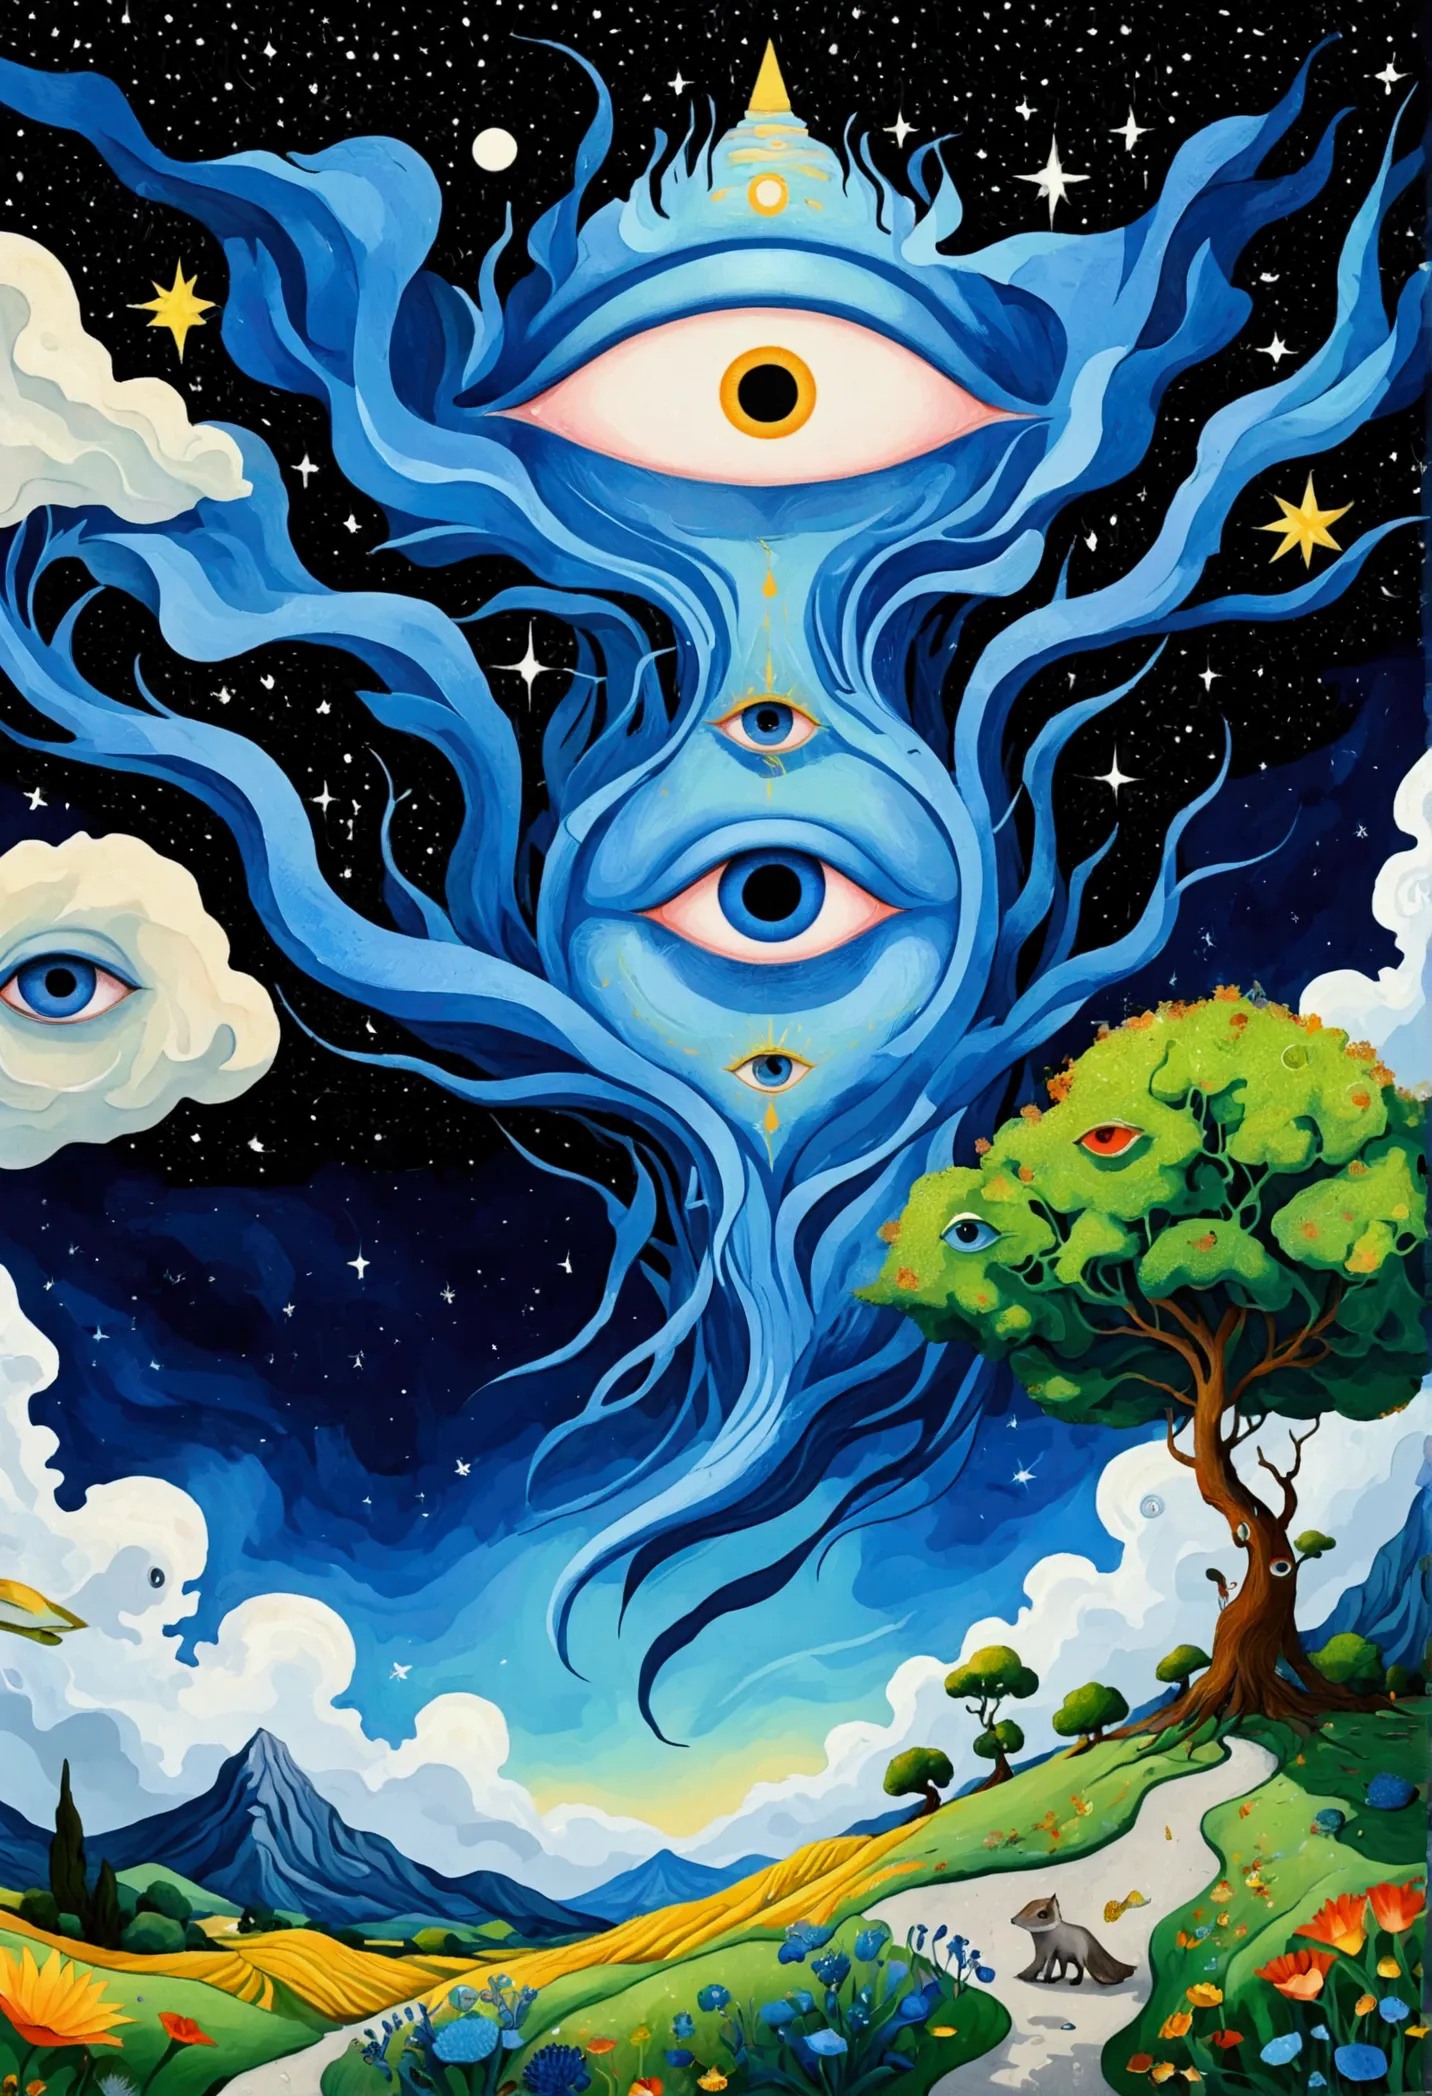 Psychedelic Art。plant、Marine Life、(((Charming eyes，The Third Eye)))、cloud、Starry Sky，galaxy、planet、Stitching together an abstrac...